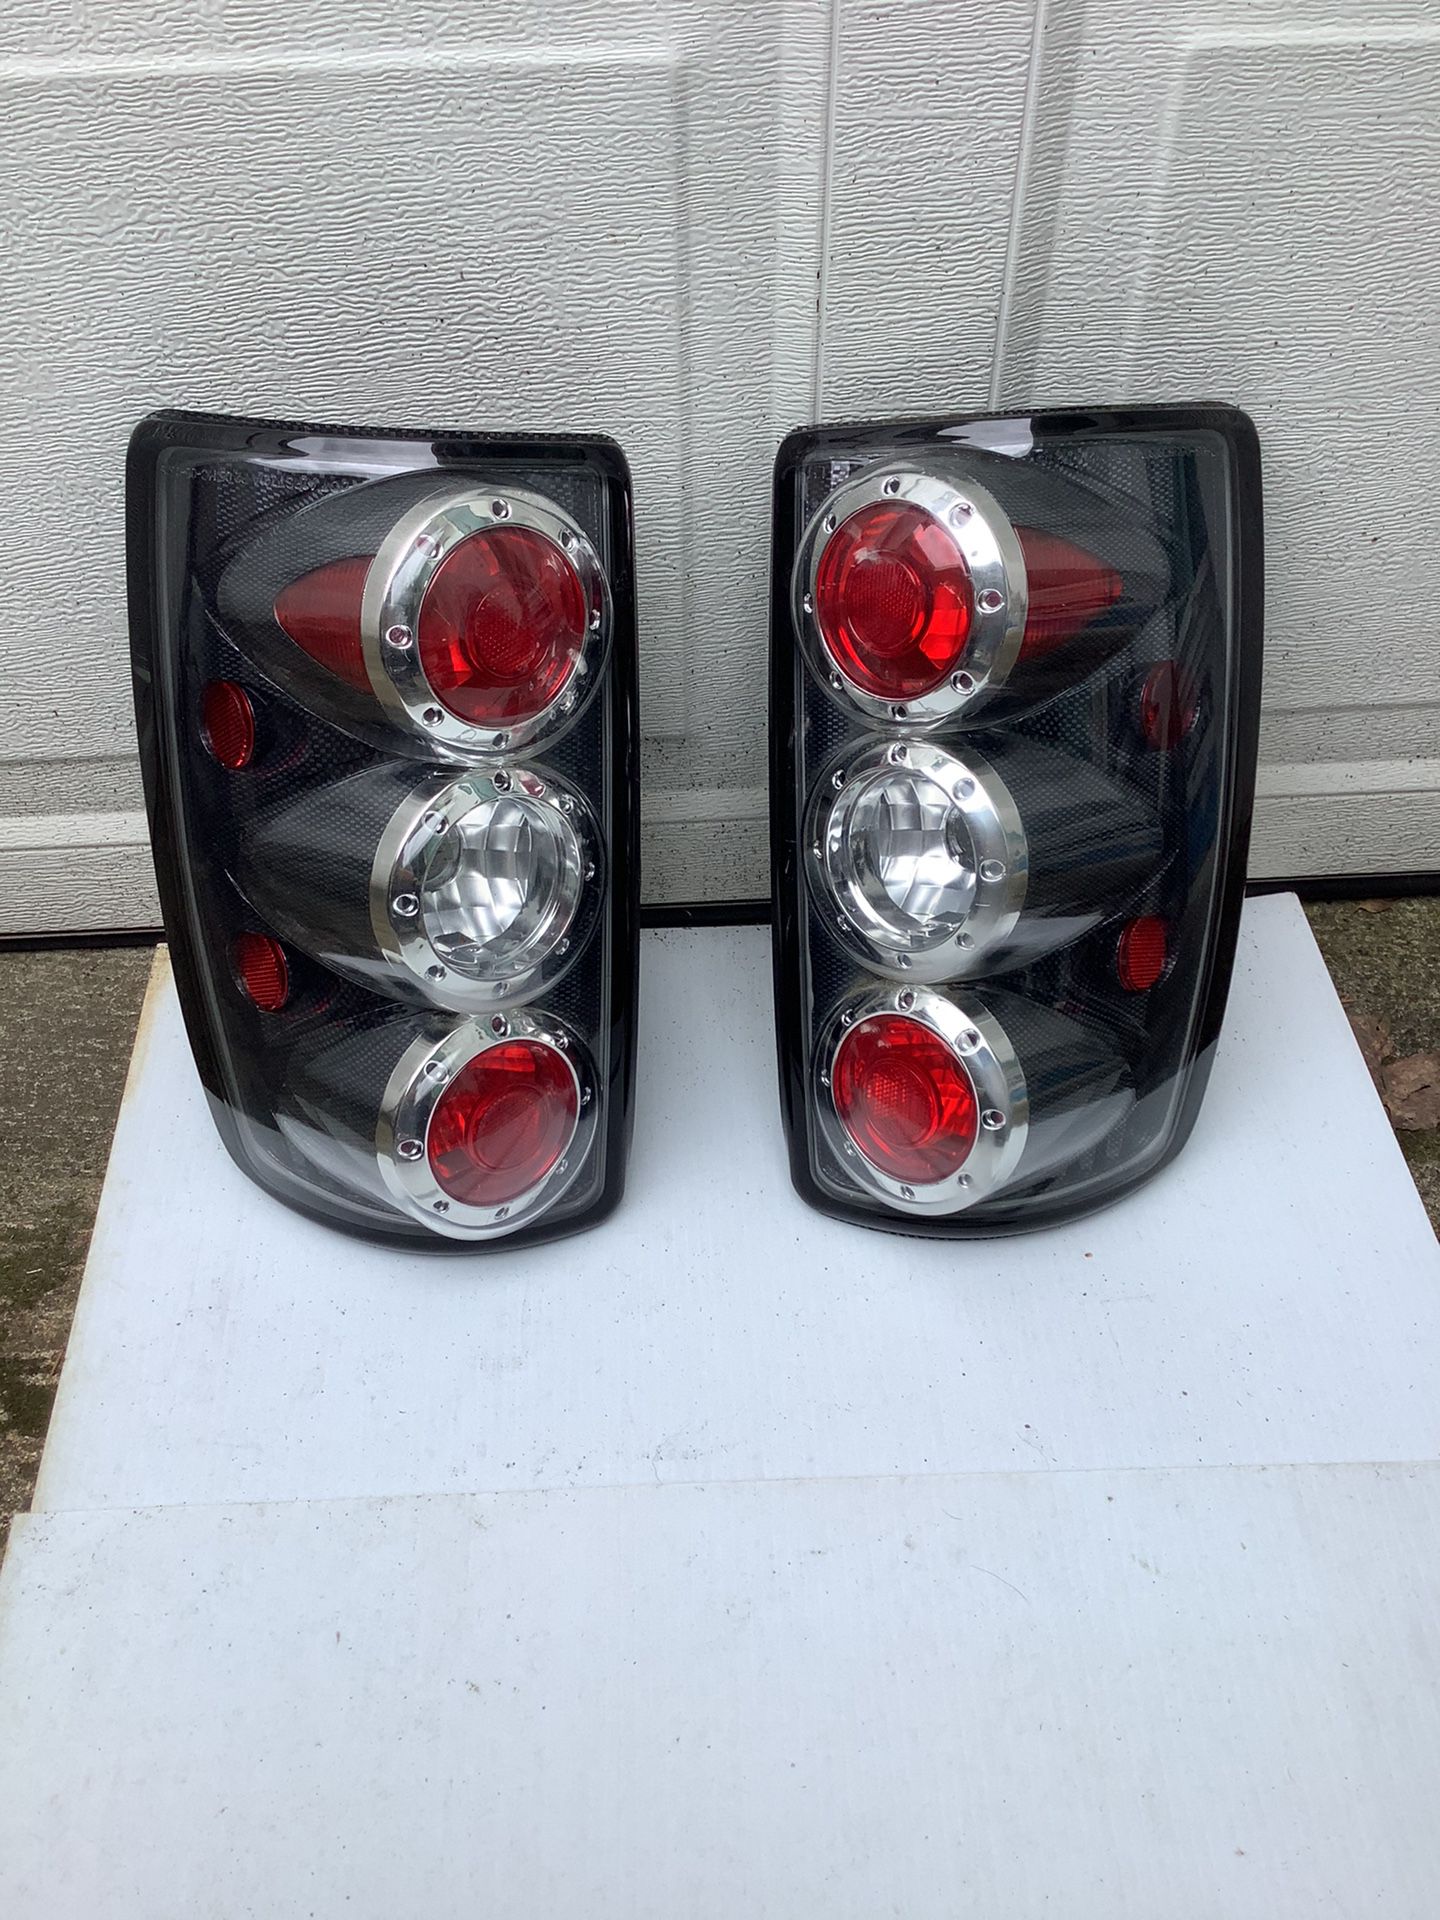 TAIL LIGHTS  GMC OR CHEVY